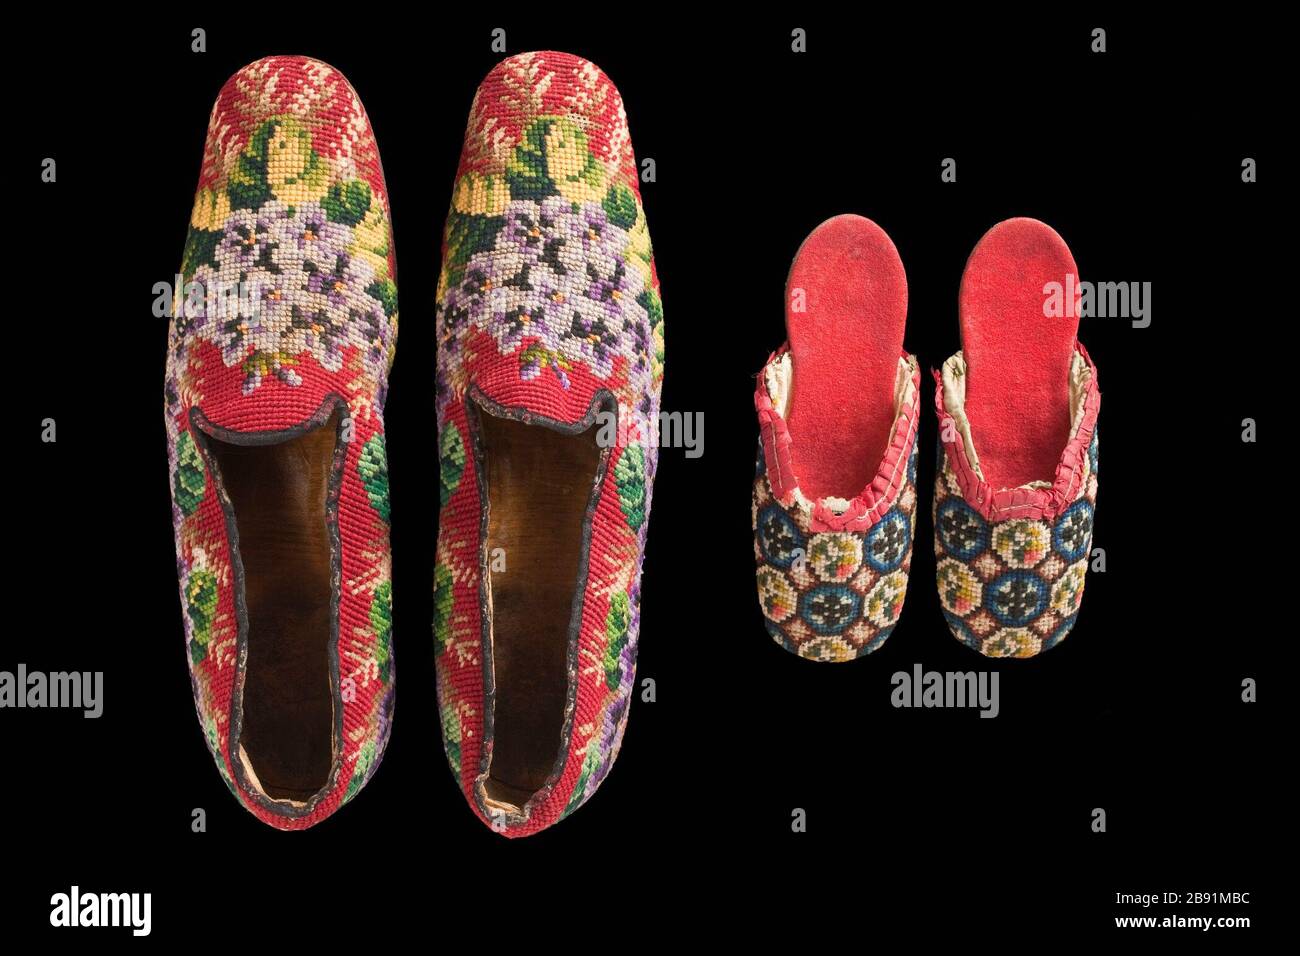 'Pair of Man's Slippers (image 2 of 5); English:  Europe or United States, 1850-1900 Costumes; Accessories Linen canvas with wool needlepoint (Berlin work), and leather Mrs. Alice F. Schott Bequest (M.67.8.165a-b) Costume and Textiles; between 1850 and 1900 date QS:P571,+1500-00-00T00:00:00Z/6,P1319,+1850-00-00T00:00:00Z/9,P1326,+1900-00-00T00:00:00Z/9; ' Stock Photo